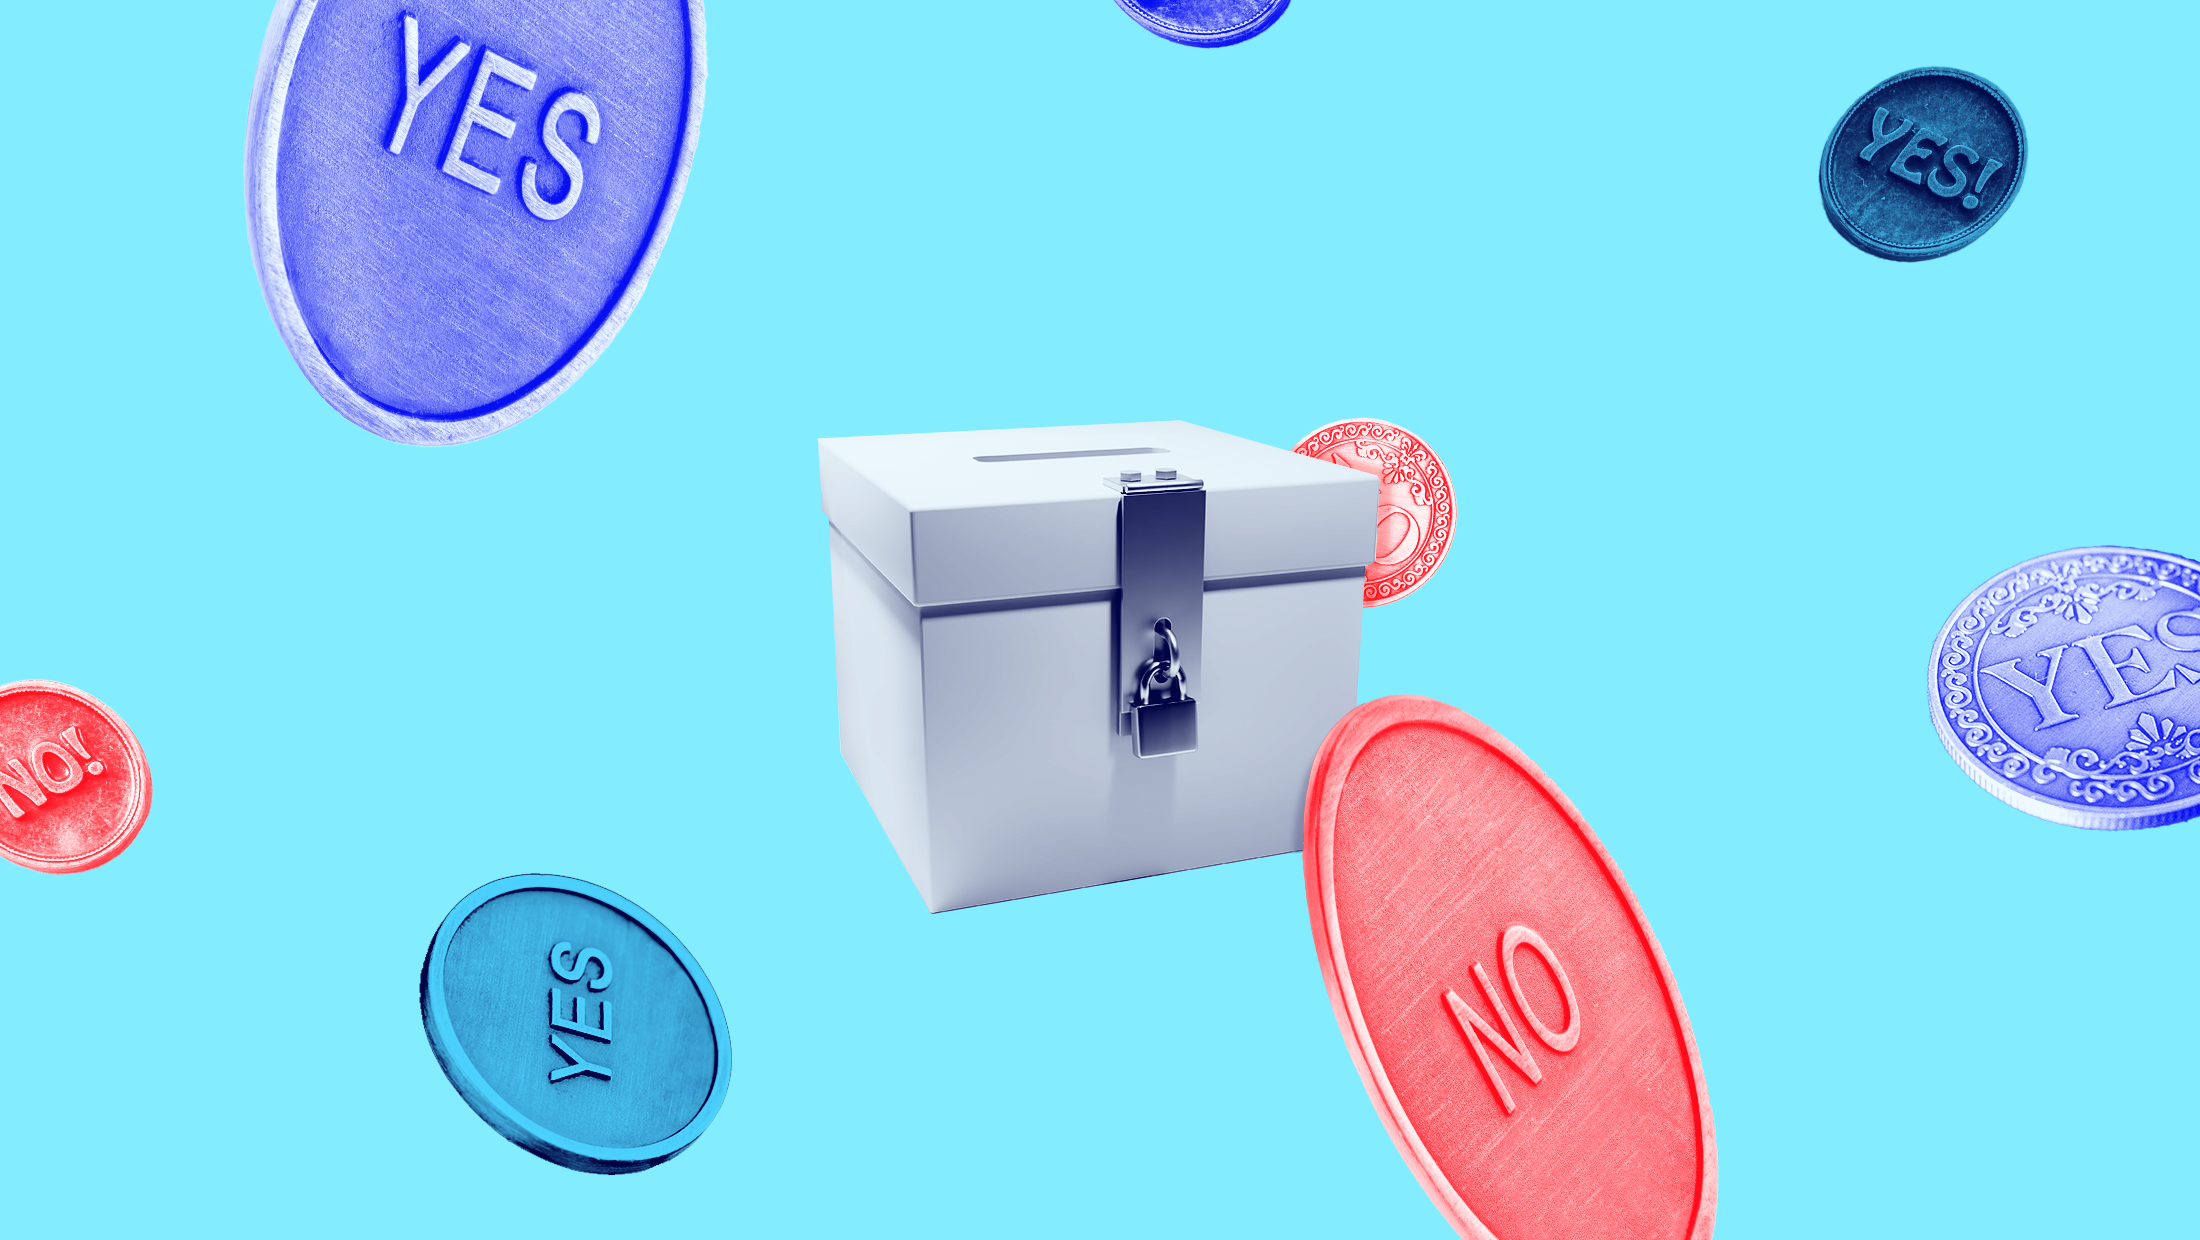 A locked ballot box on a blue background surrounded by red and blue coins that say either Yes or NO.